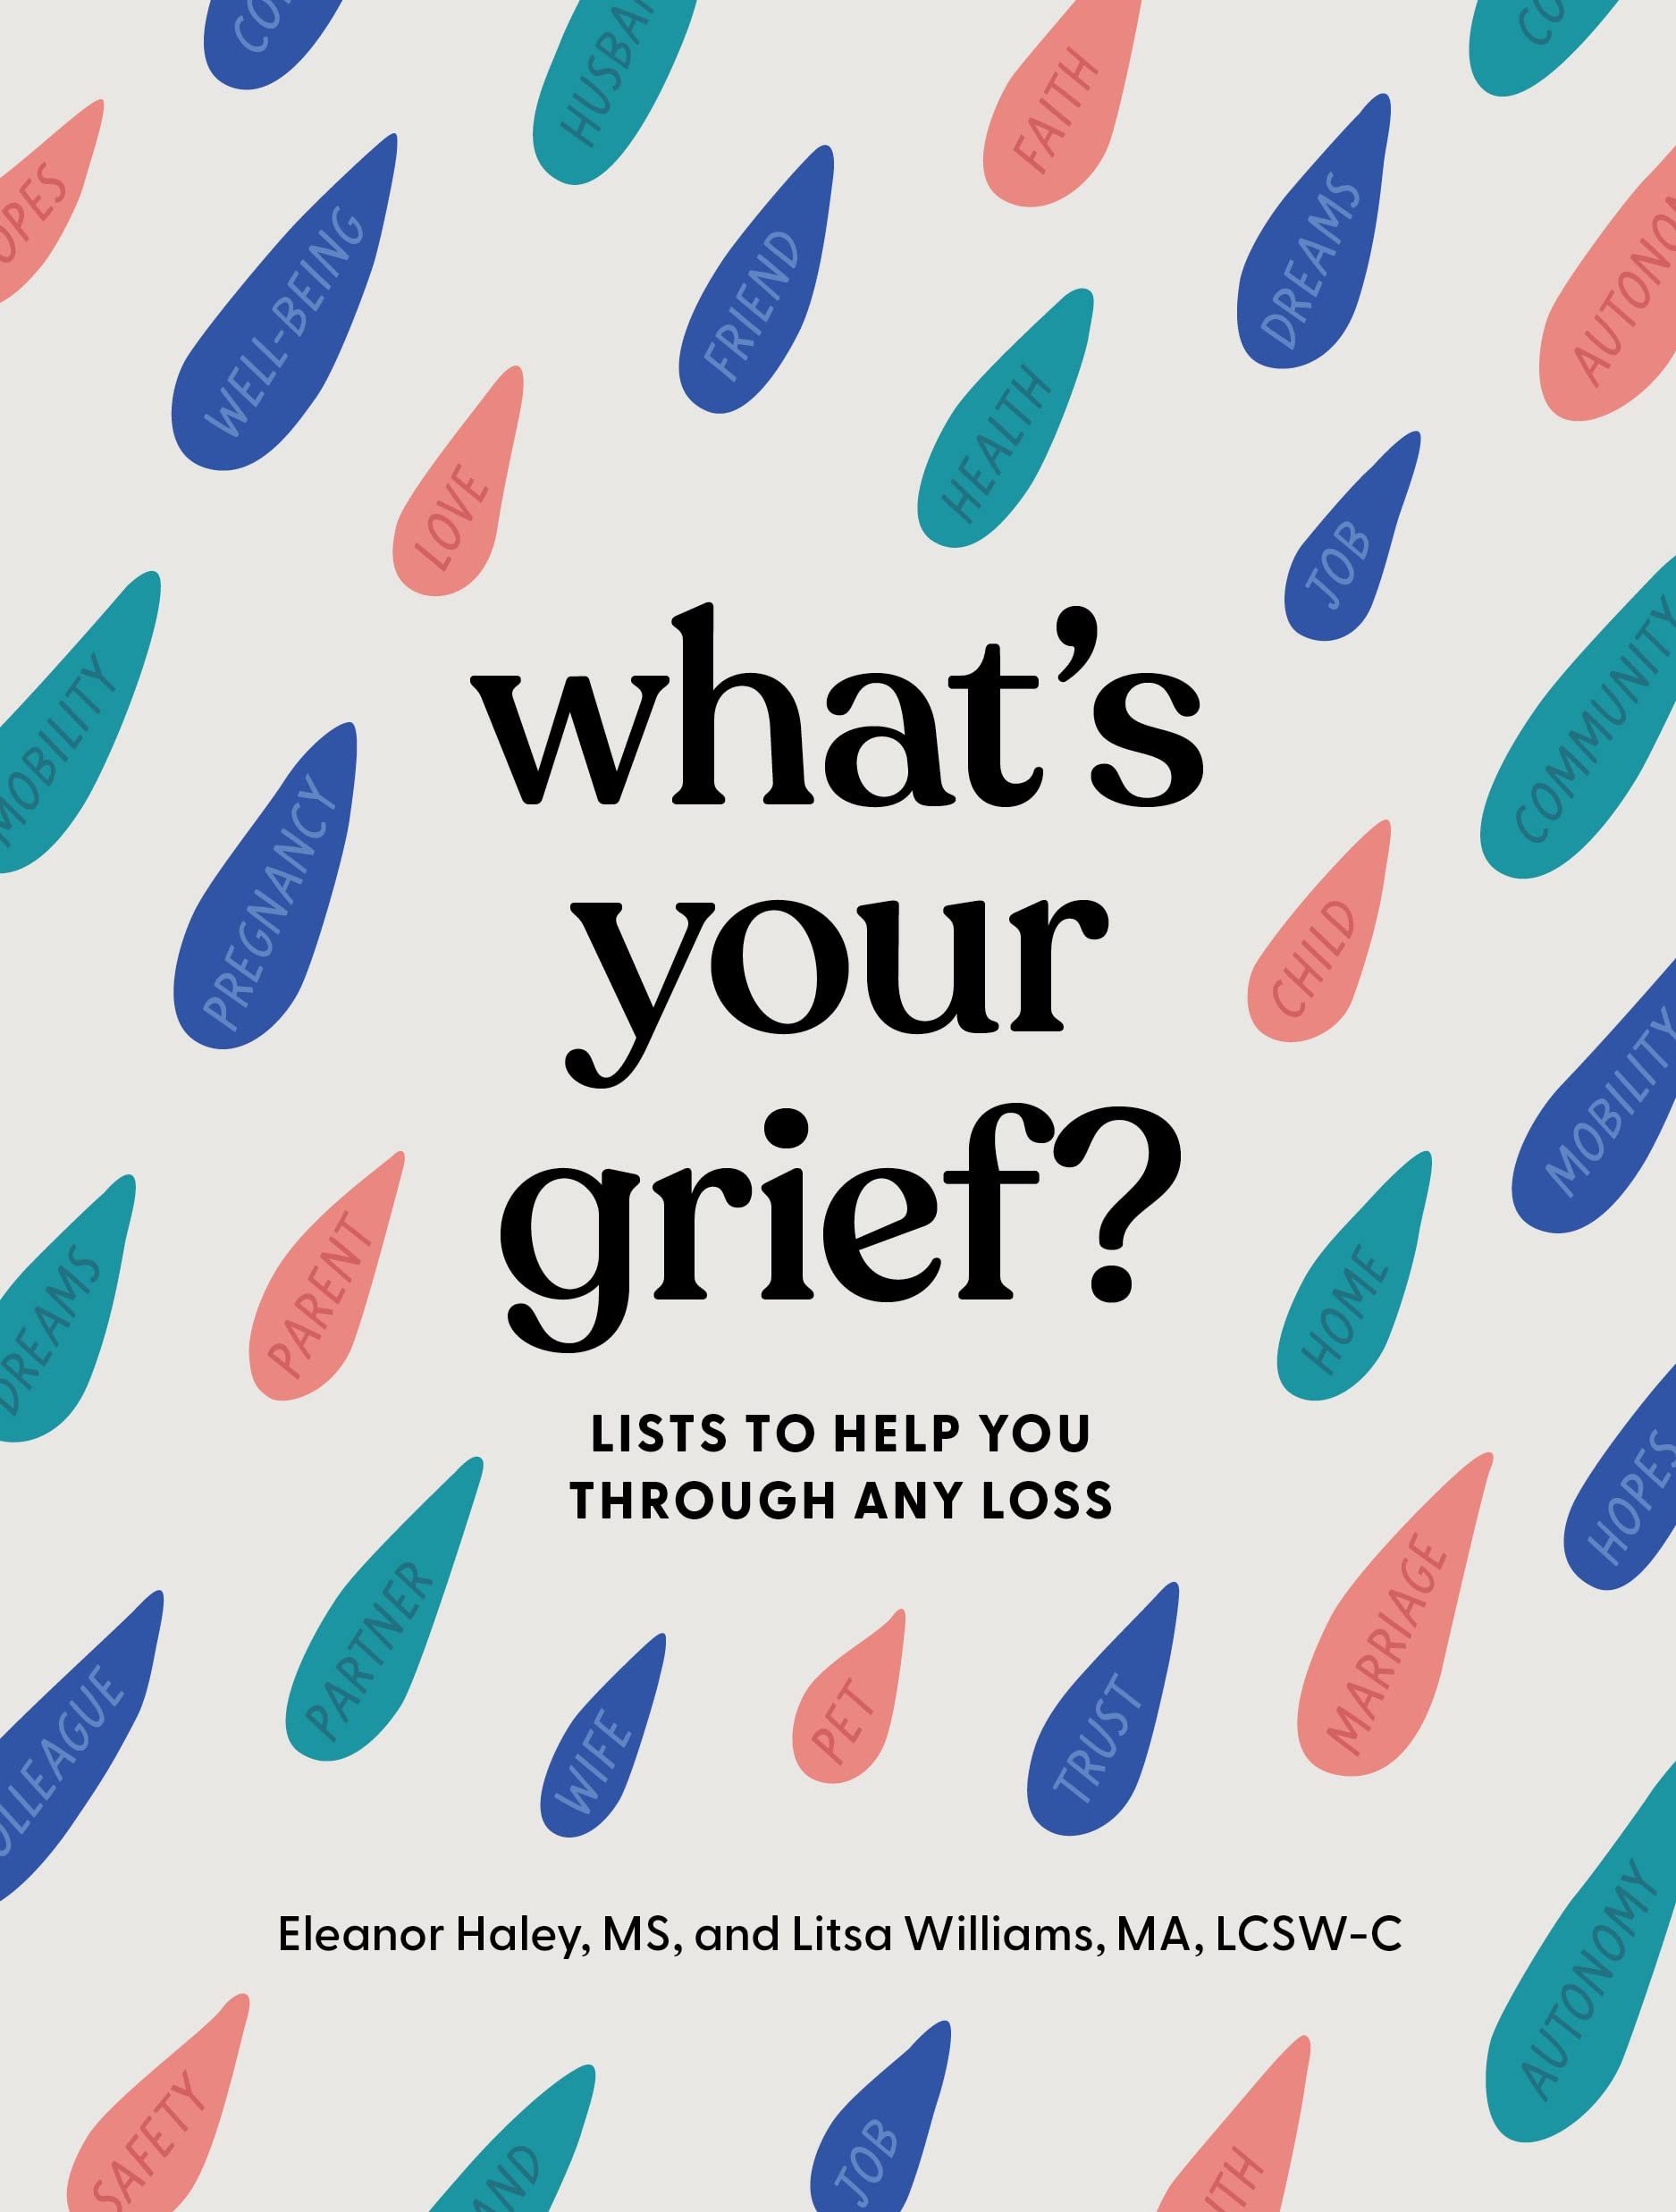 whats your grief